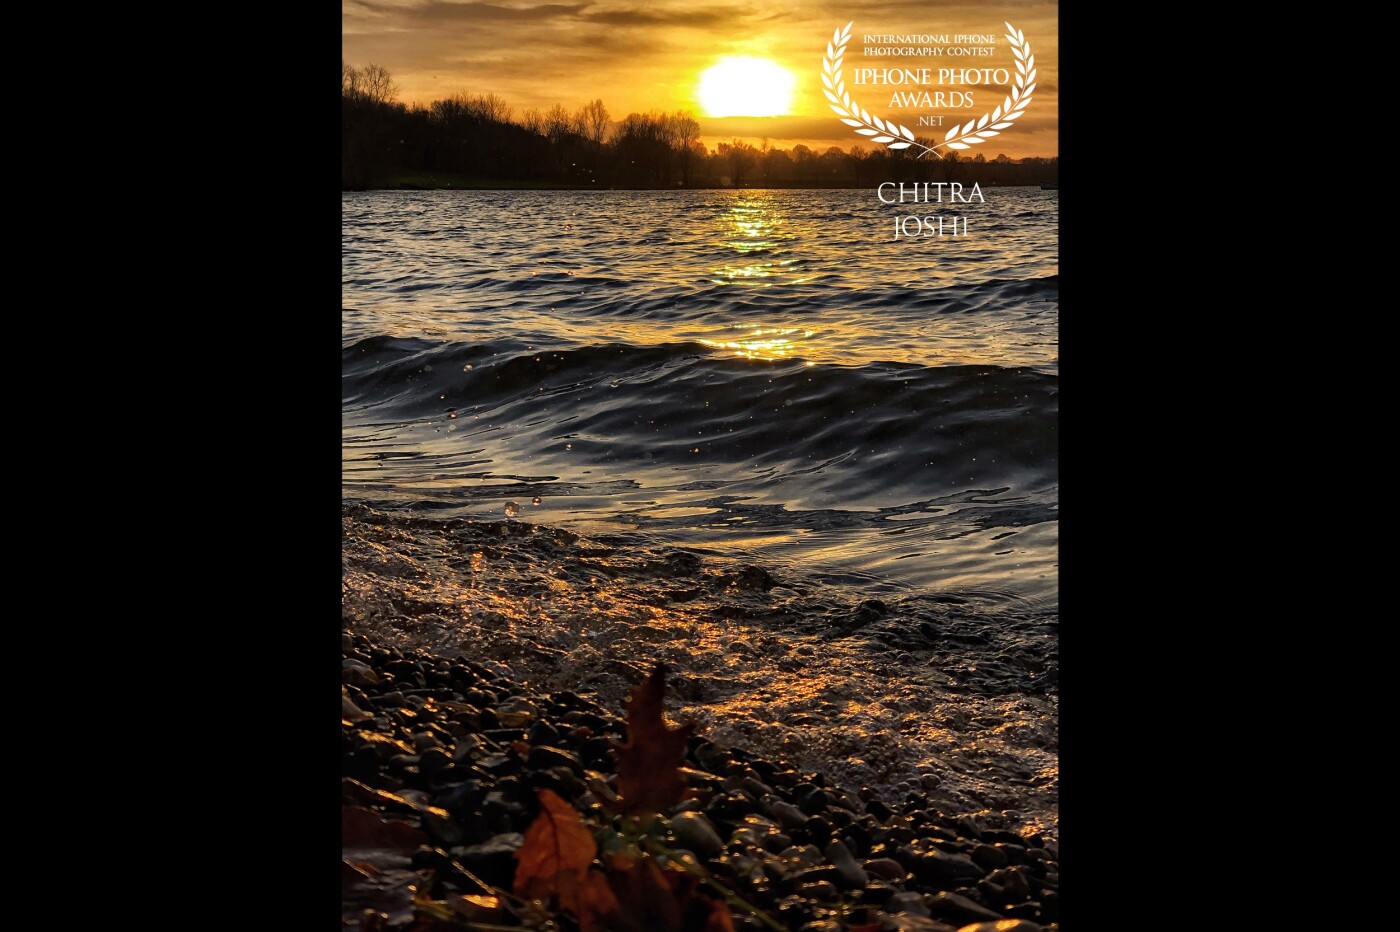 This magnificent golden sunset view was shot at Rutland Water, United Kingdom. A setting sun has always evoked a feeling of happiness and hope in me.  As I watched this radiant sunset at the horizon and the graceful waves, my spirits soared up thinking: Isn’t a “sinking sun” promising of “rising sun” the next day? 